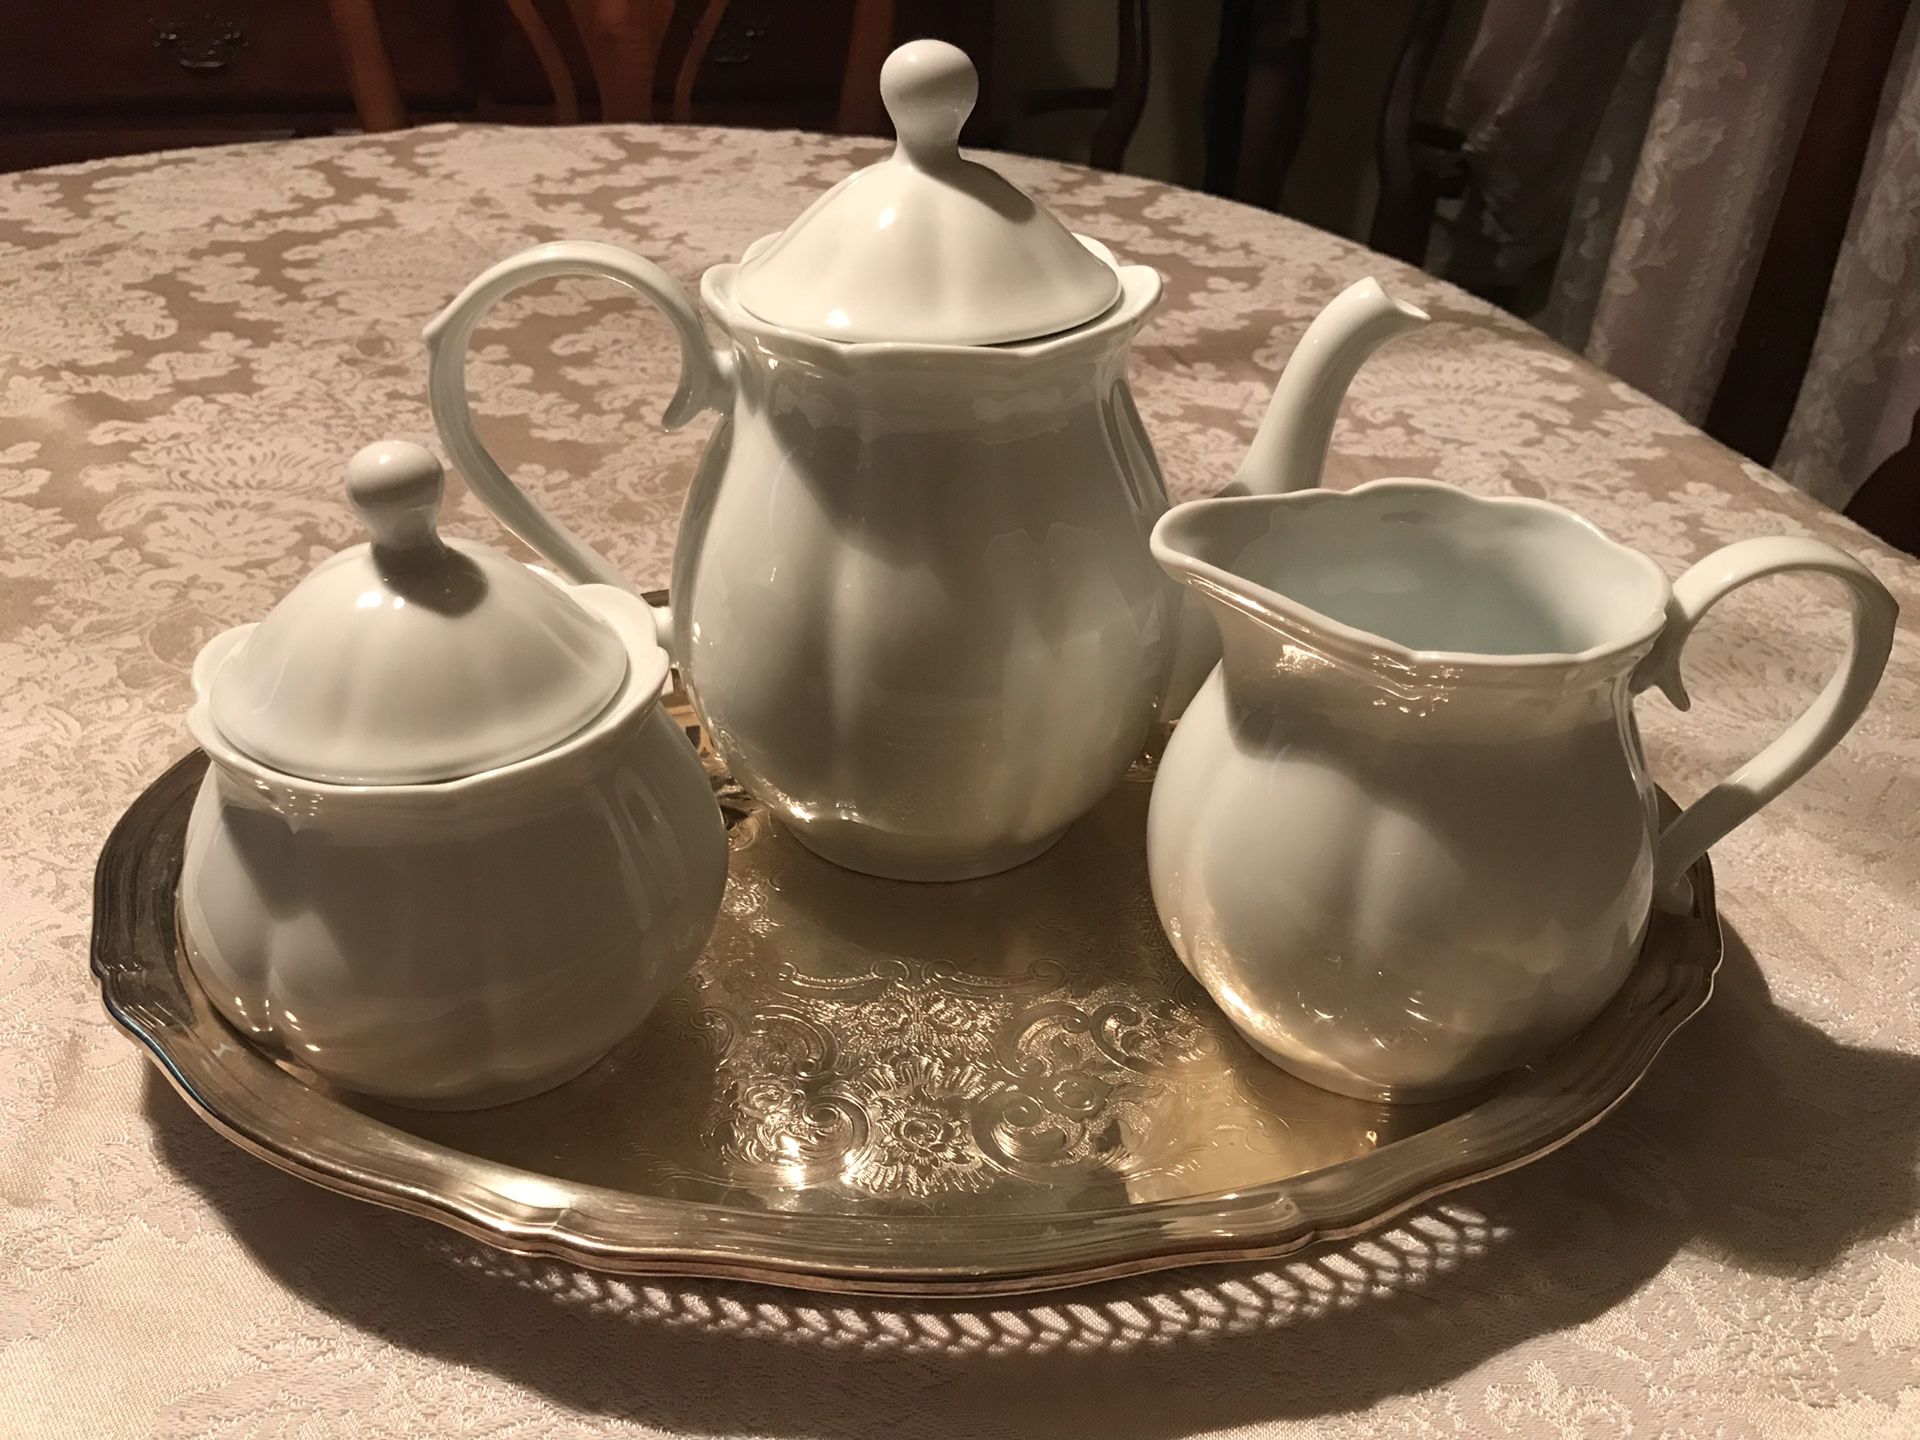 White Ceramic Tea or Coffee Set on Silver Plated Tray